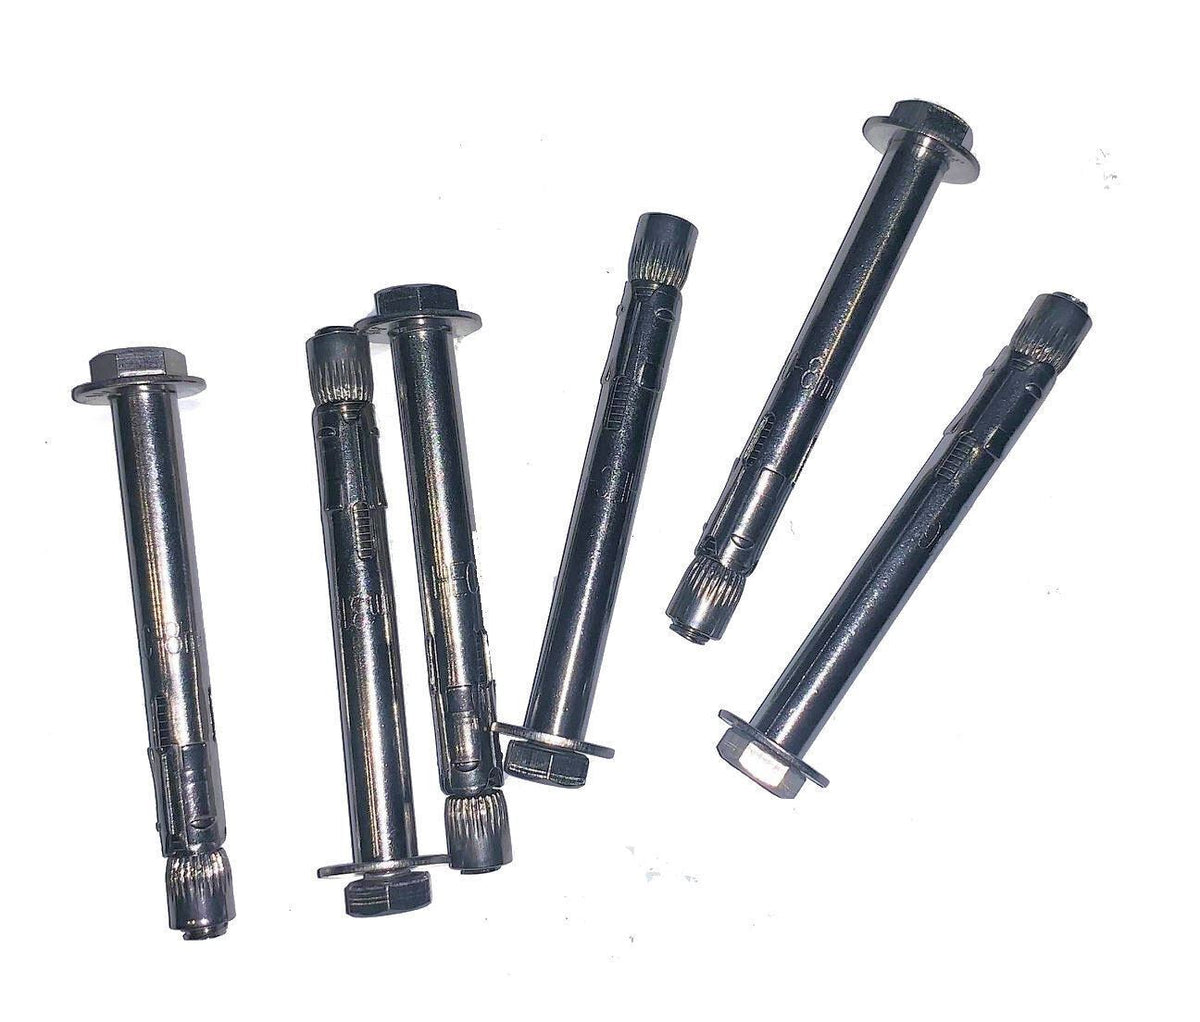 Stainless Steel Bolts suits Flanged Ladders & grab rails - set of 6